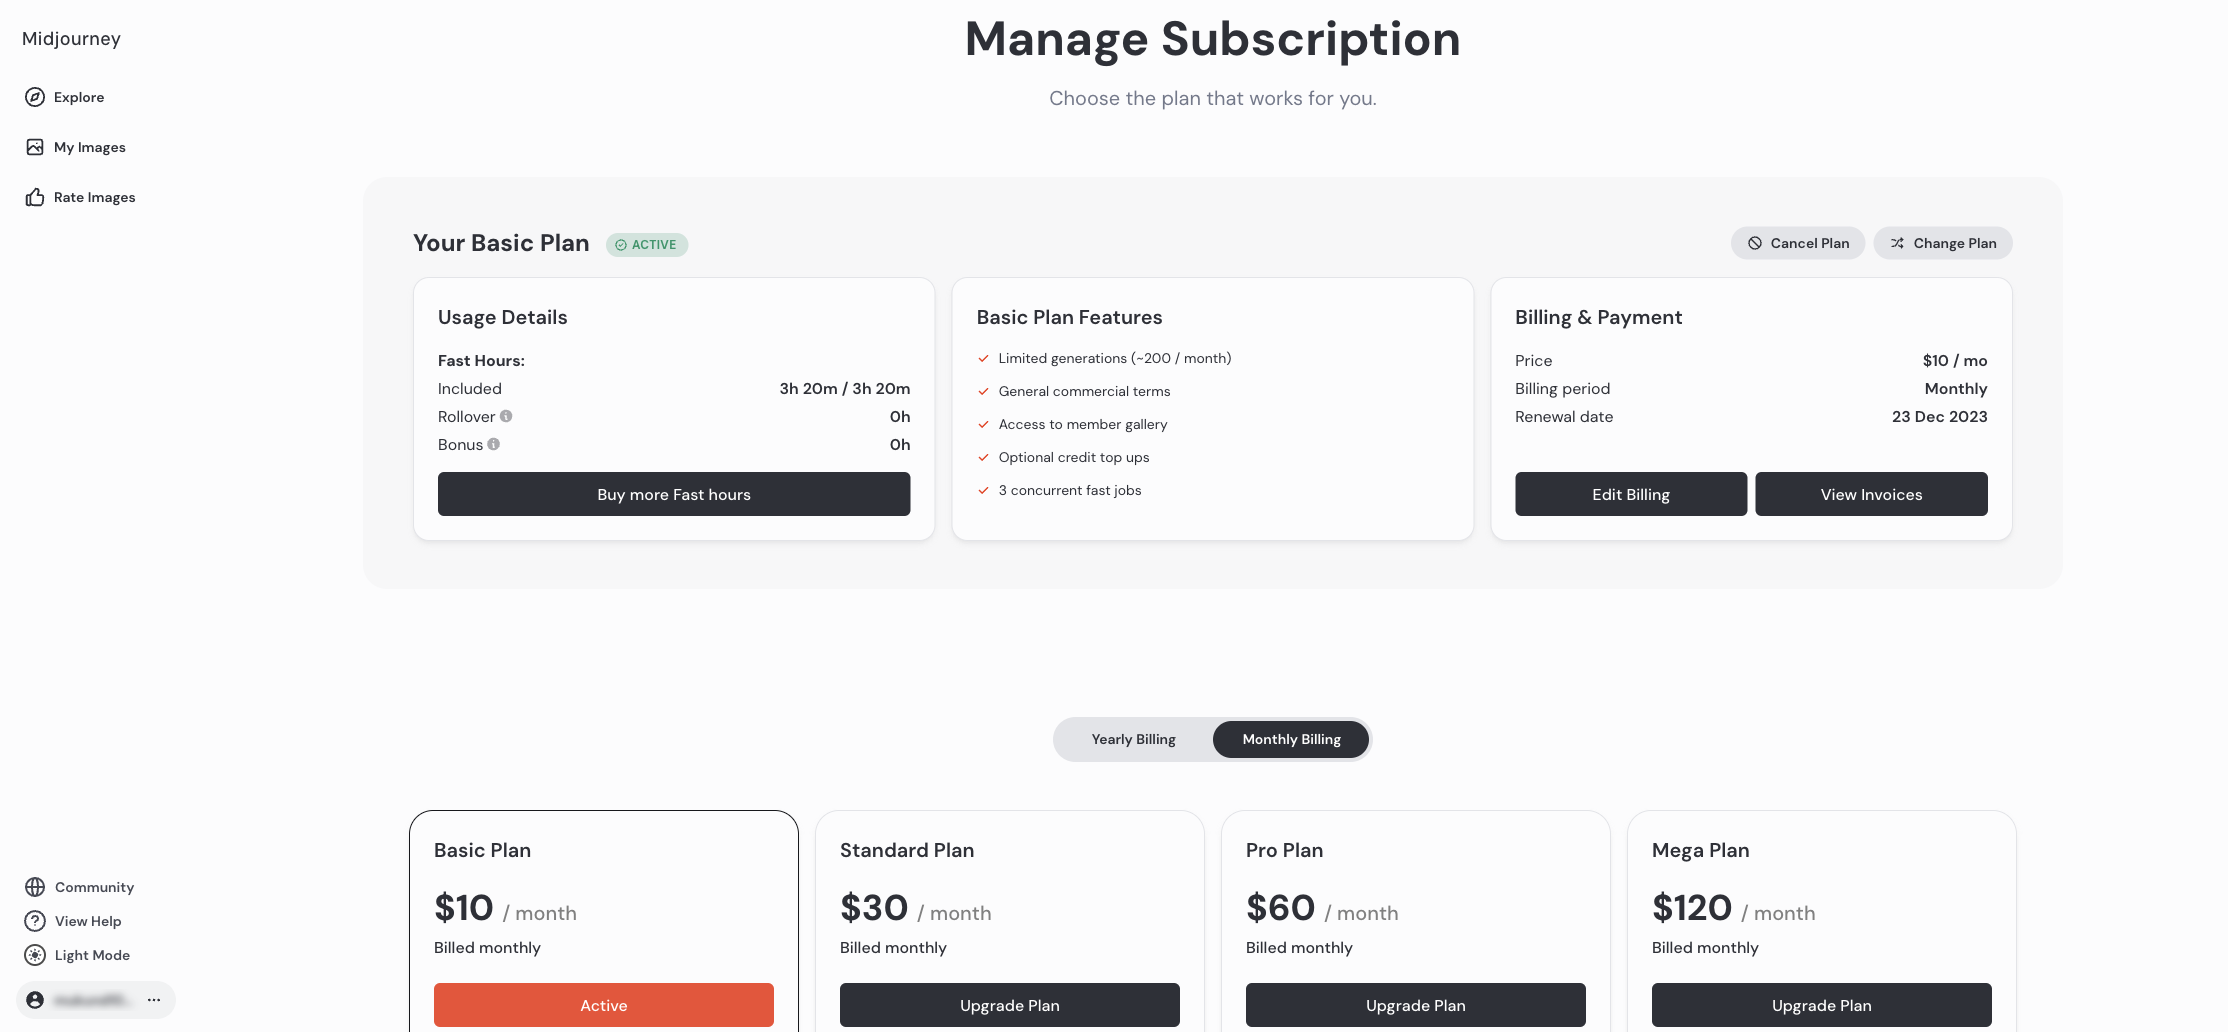 Midjourney manage subscription page